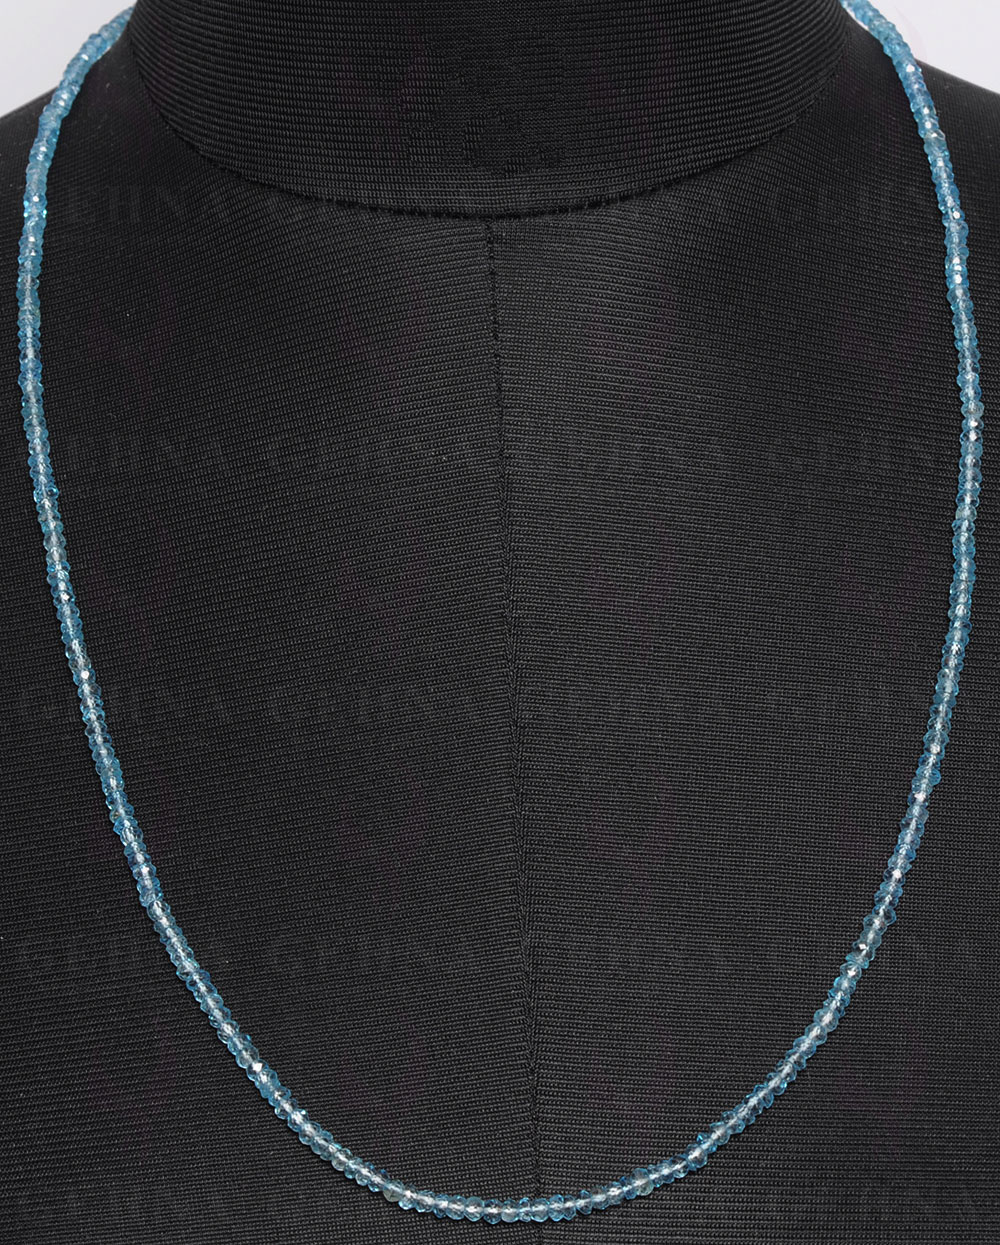 Blue Topaz's Gemstone Faceted Bead Necklace NS-1447